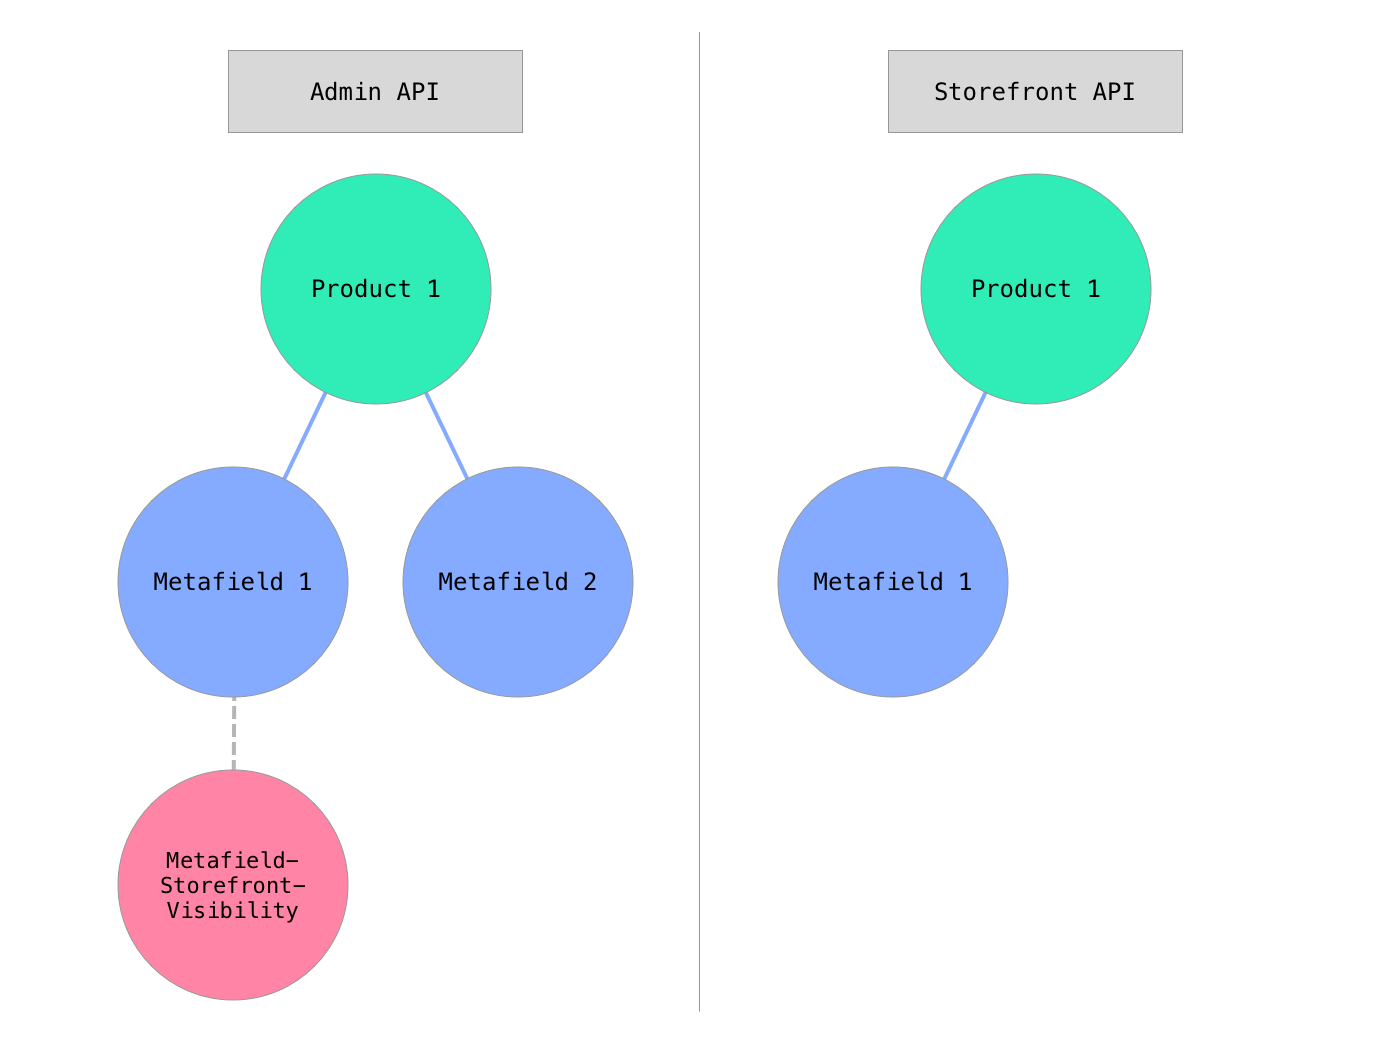 A product has two metafields: Metafield 1 and Metafield 2. Only Metafield 1 has a MetafieldStorefrontVisibility record. The Admin API can read both metafields, but the Storefront API can read only Metafield 1.